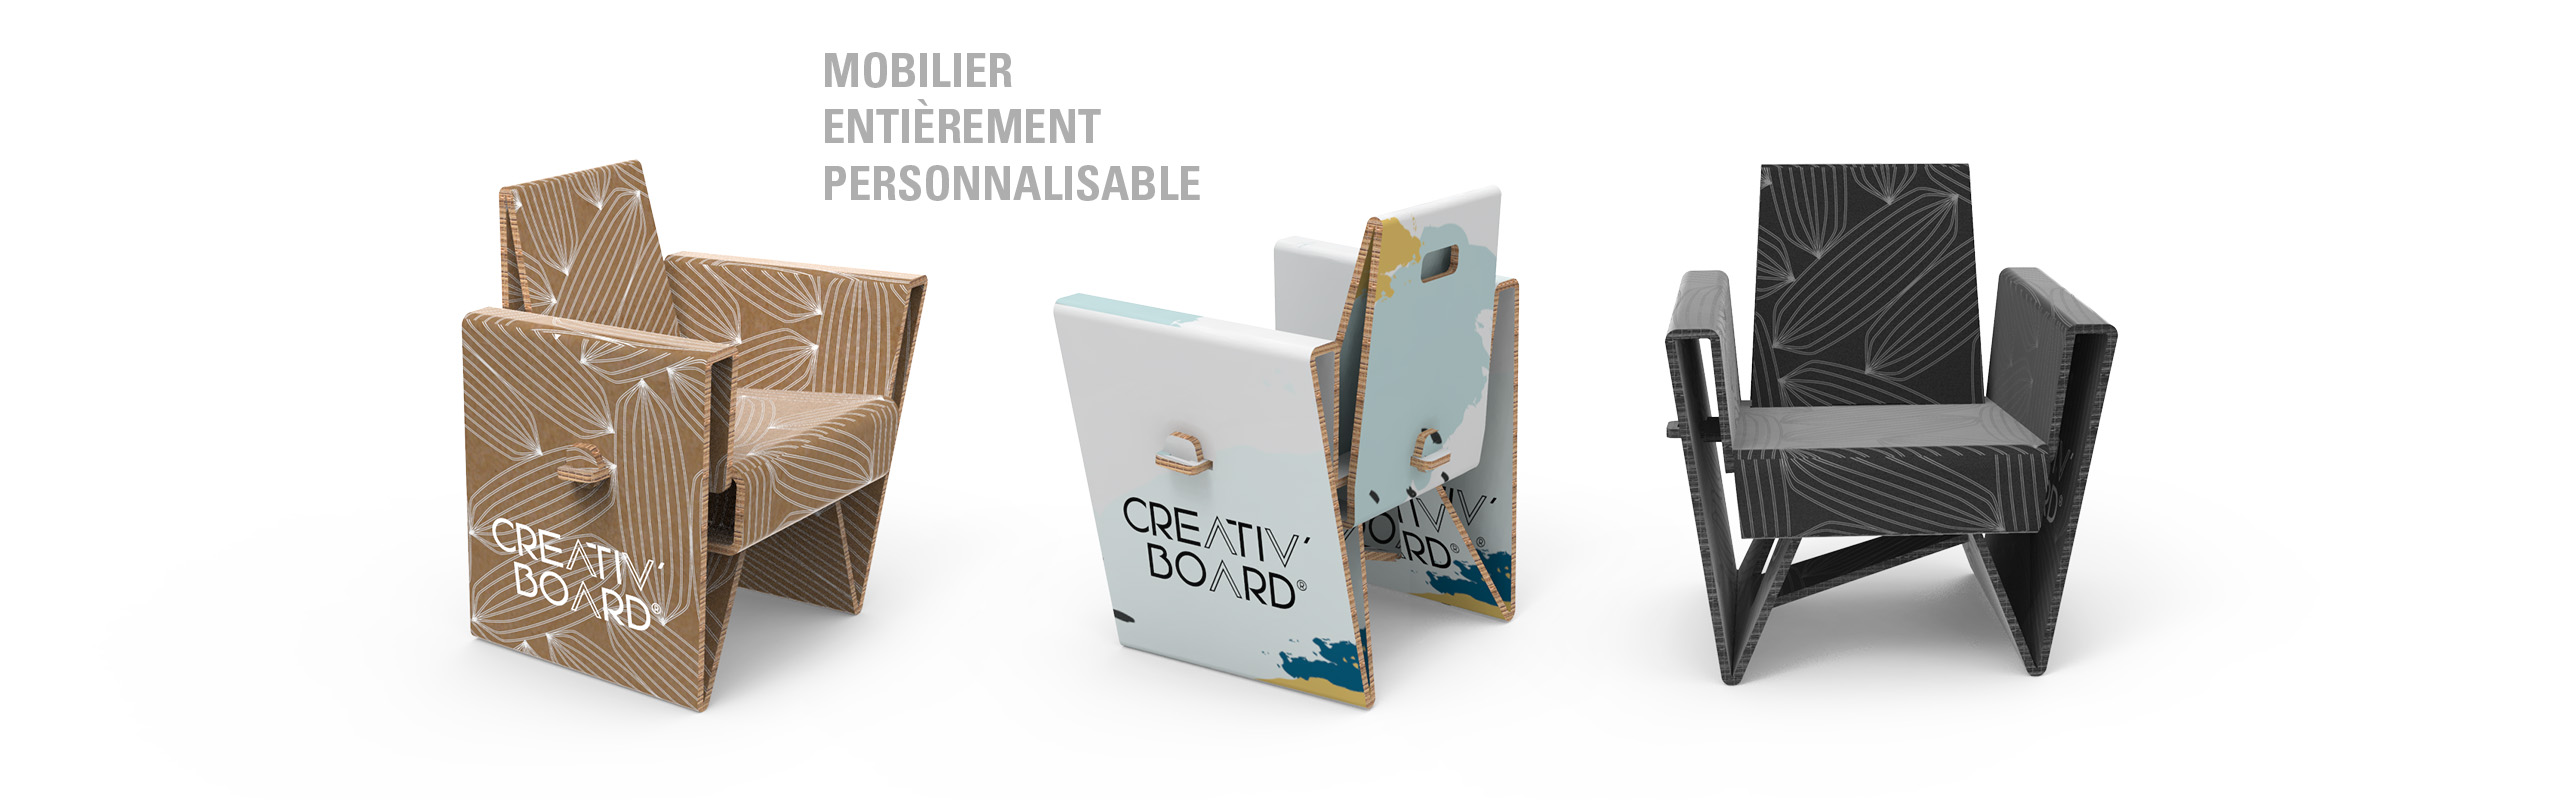 creativboard-accueil-mobilier-1